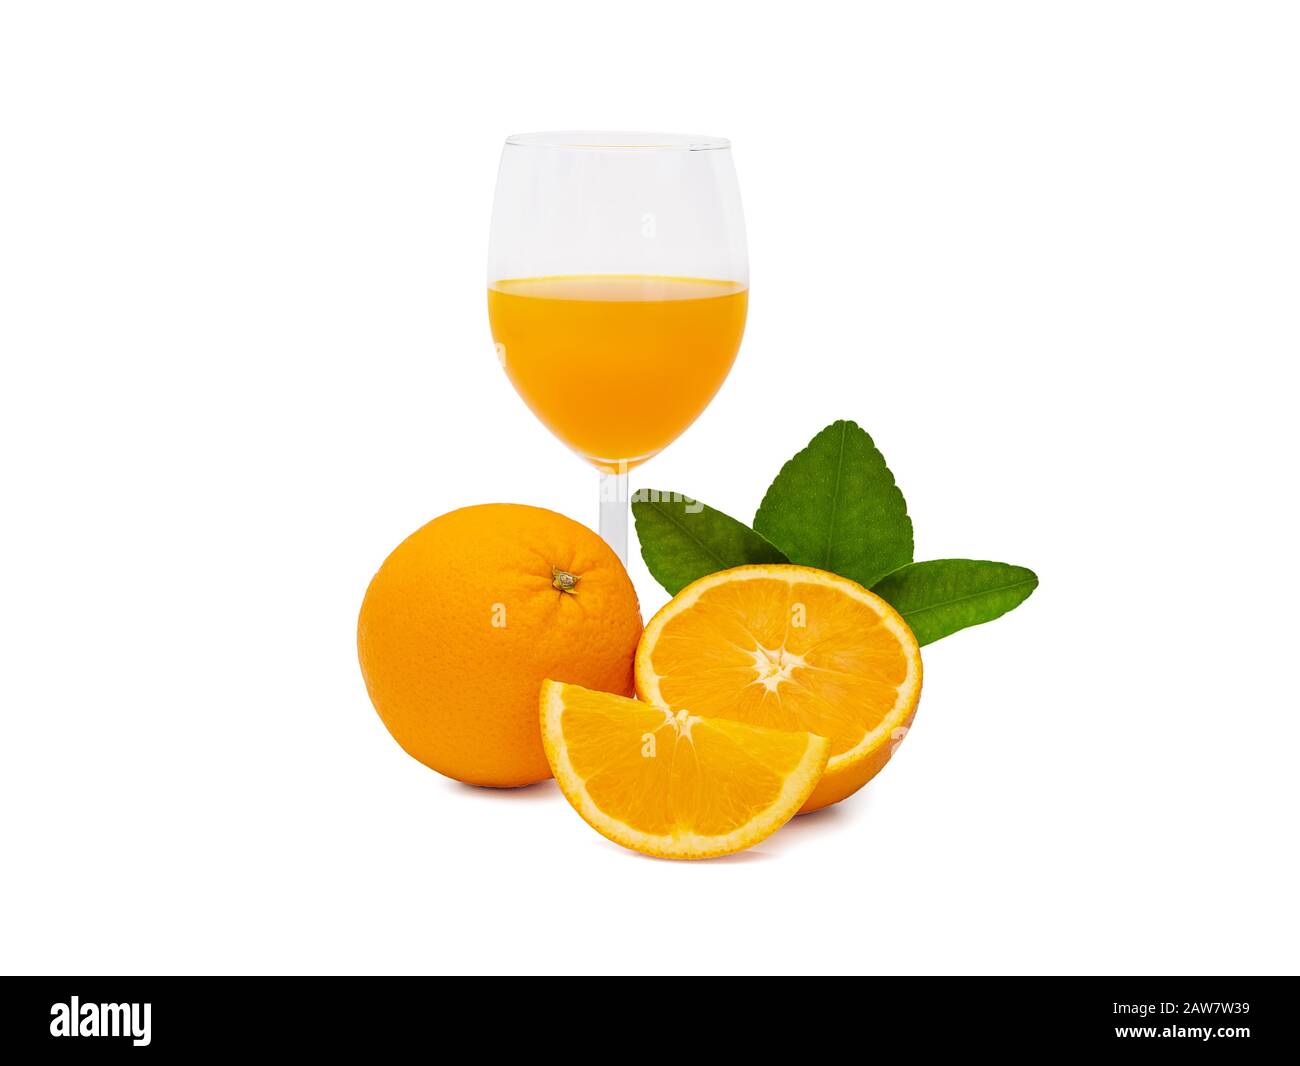 a glass of fresh orange juice and group of fresh orange fruits with green leaves, isolated on white background with clipping path. fruit product displ Stock Photo